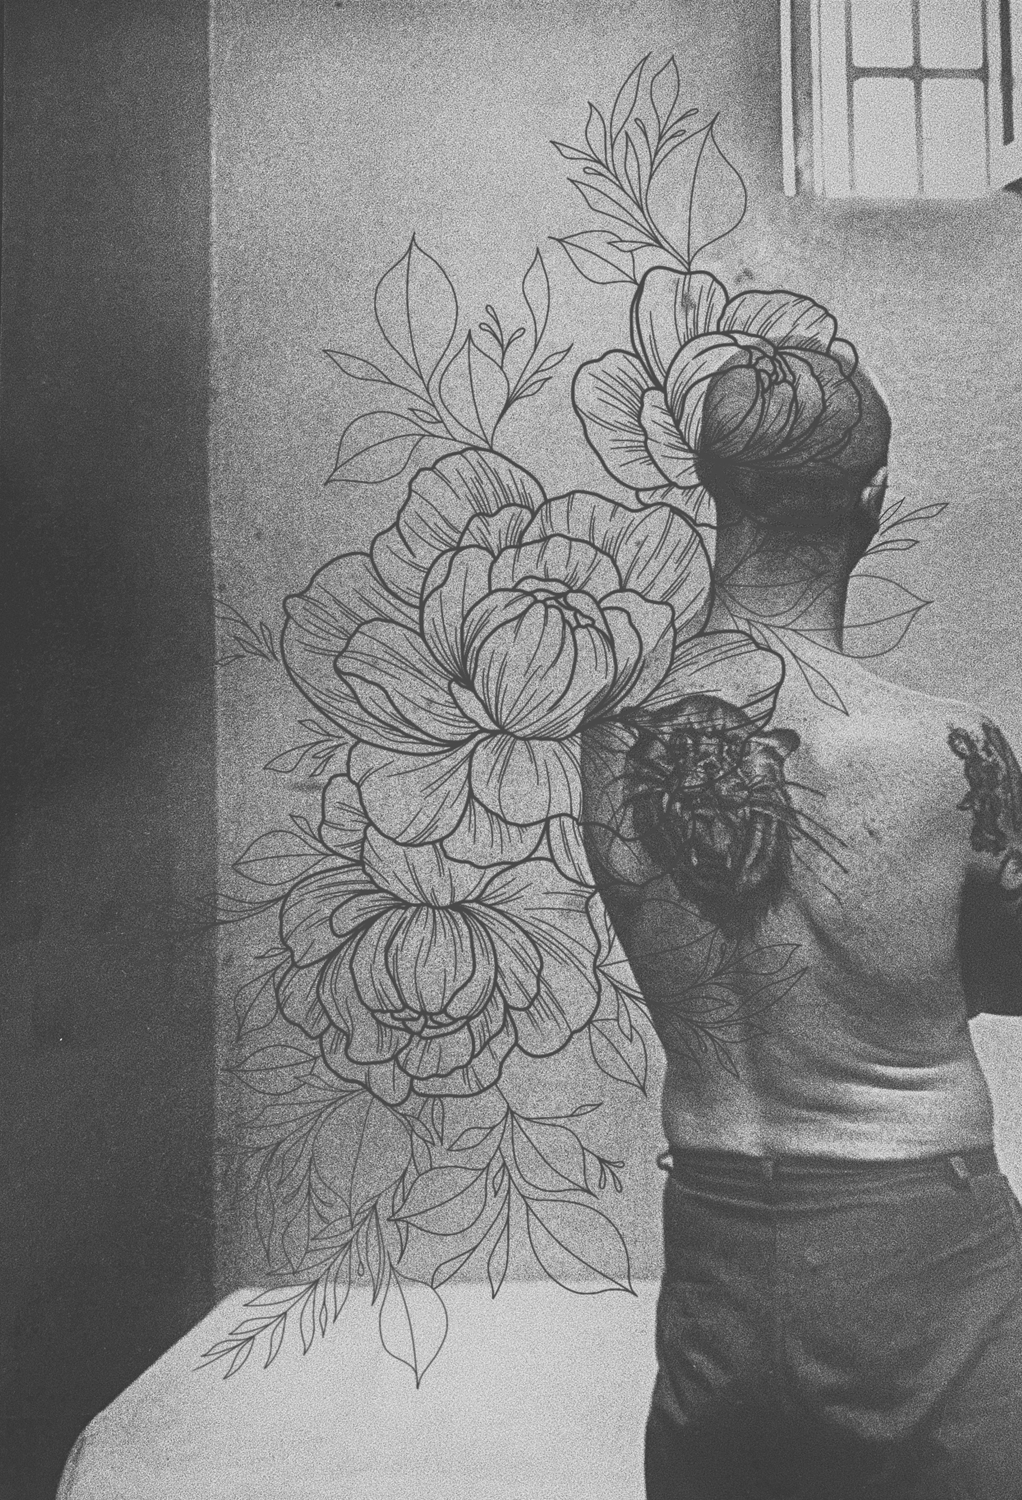 drawn flowers layered on greyscale back of man in prison cell